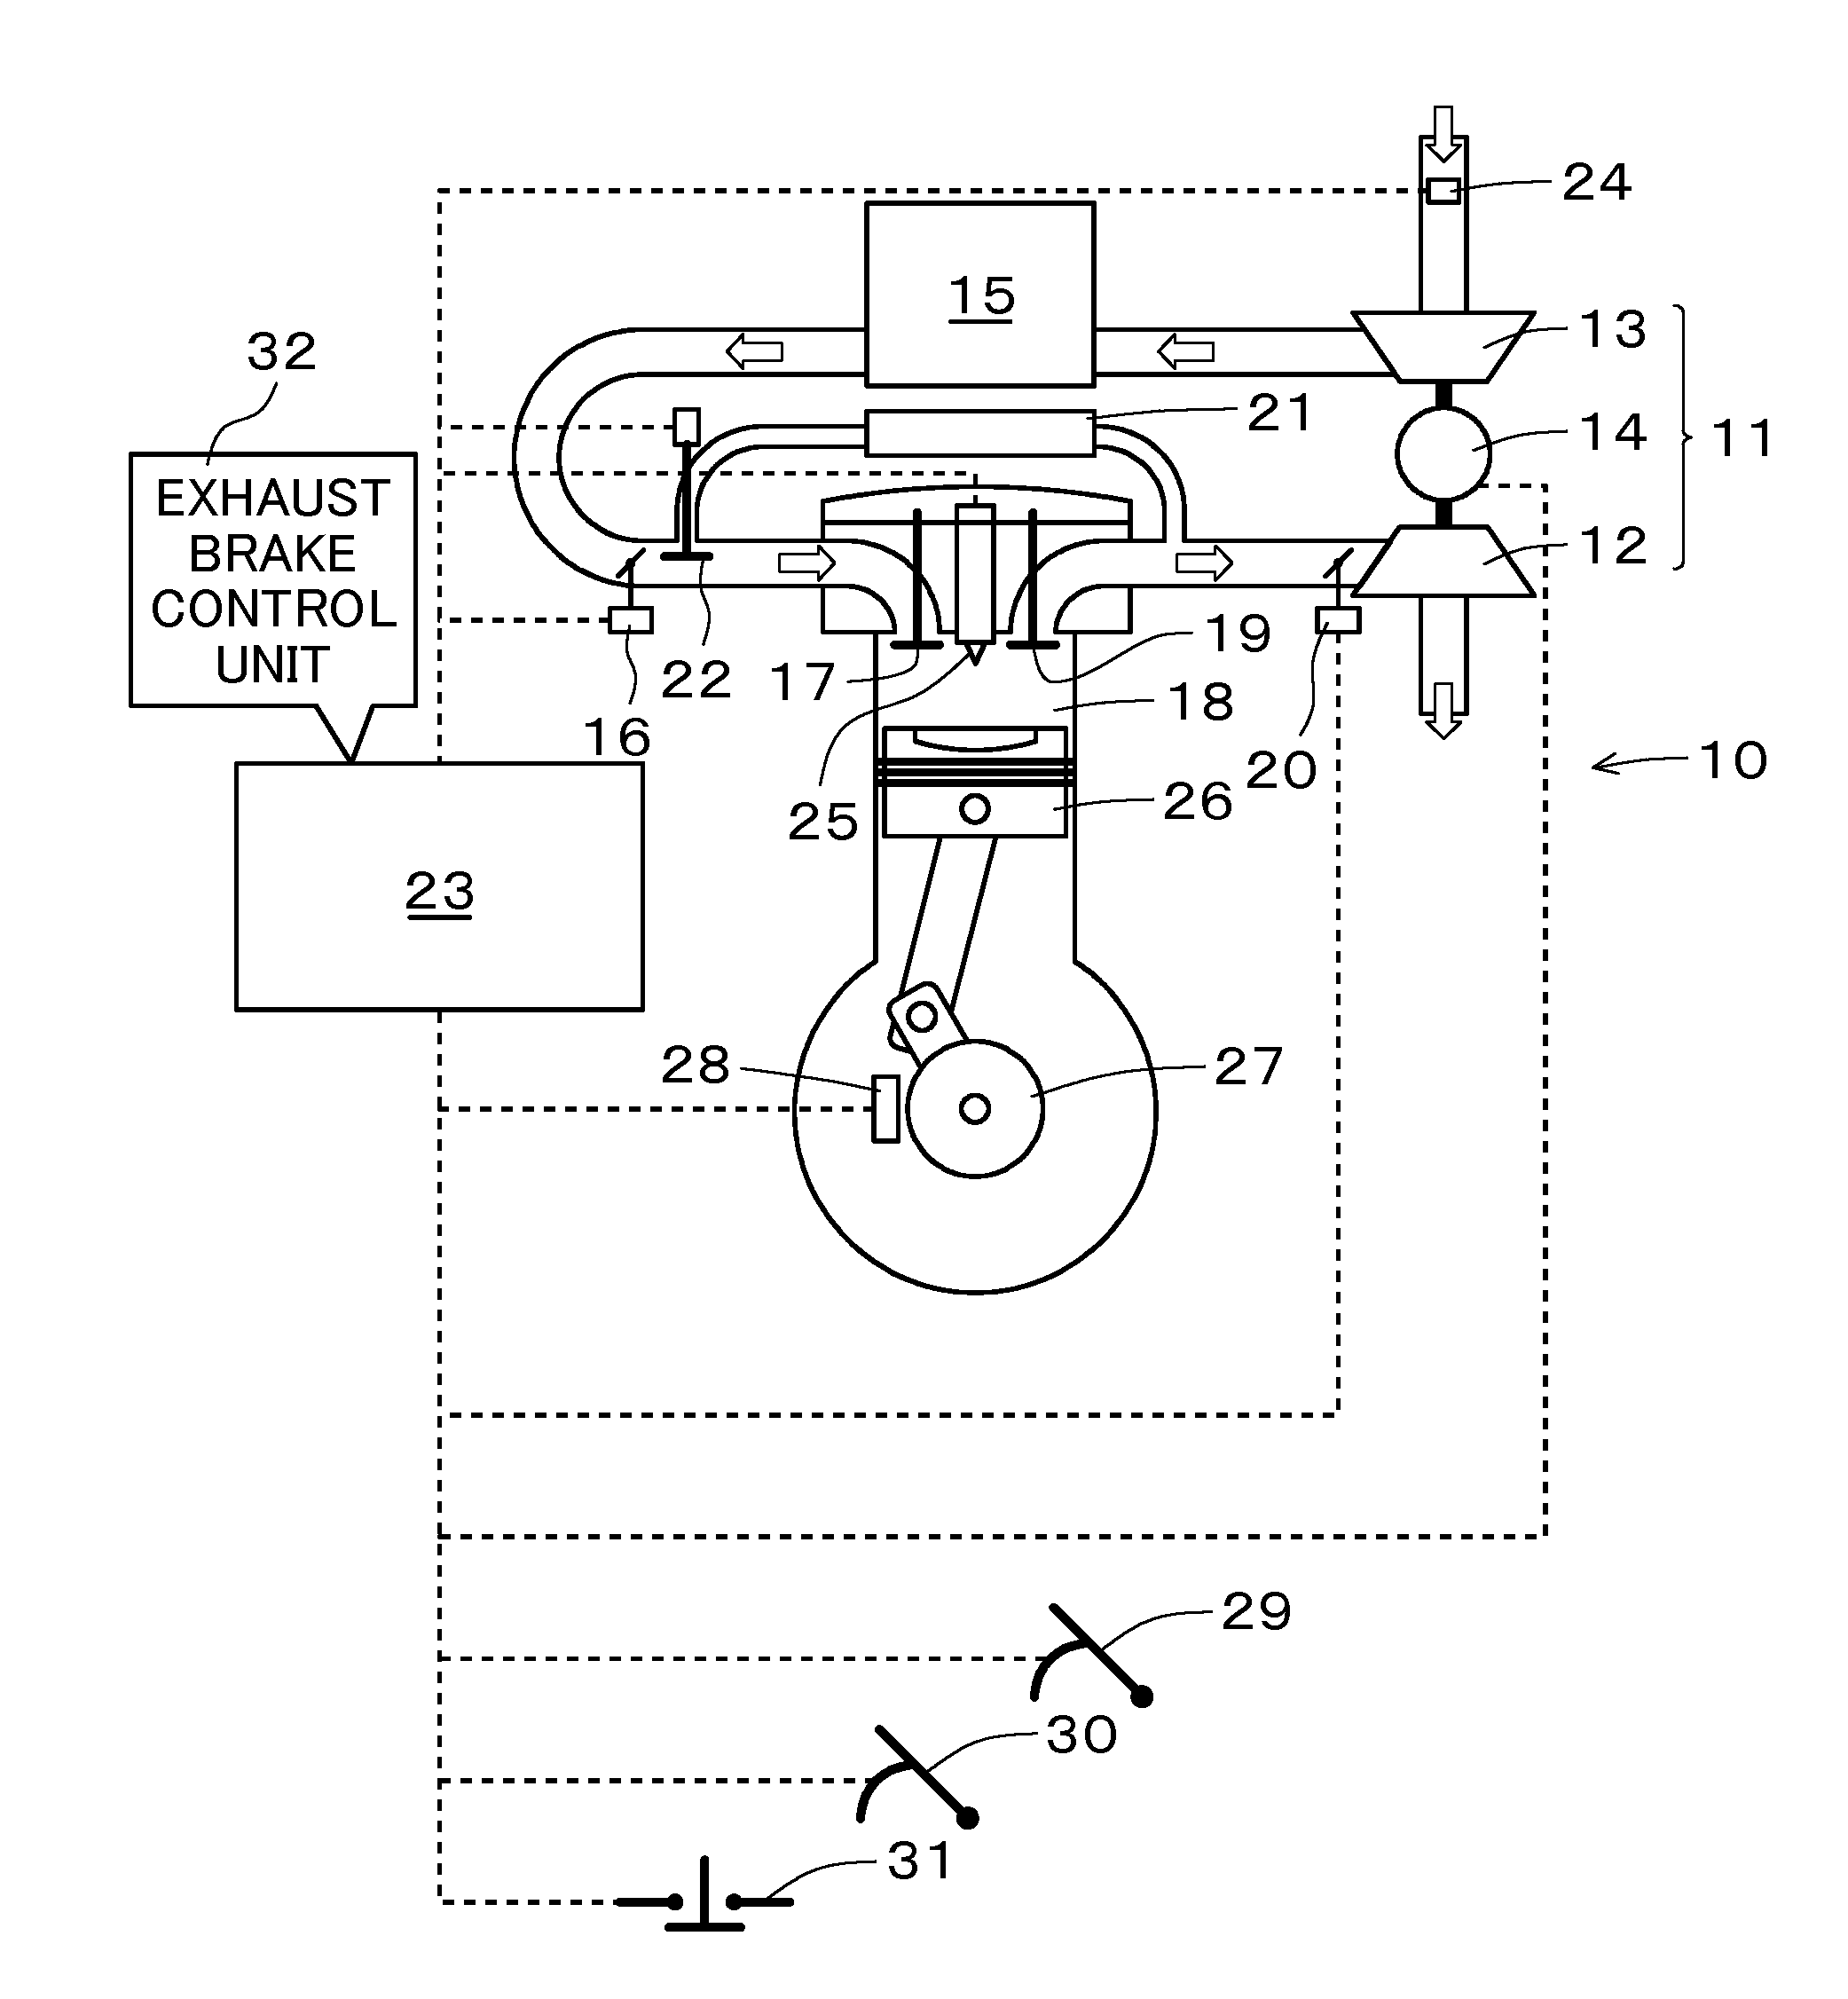 Internal combustion engine exhaust brake control method and device